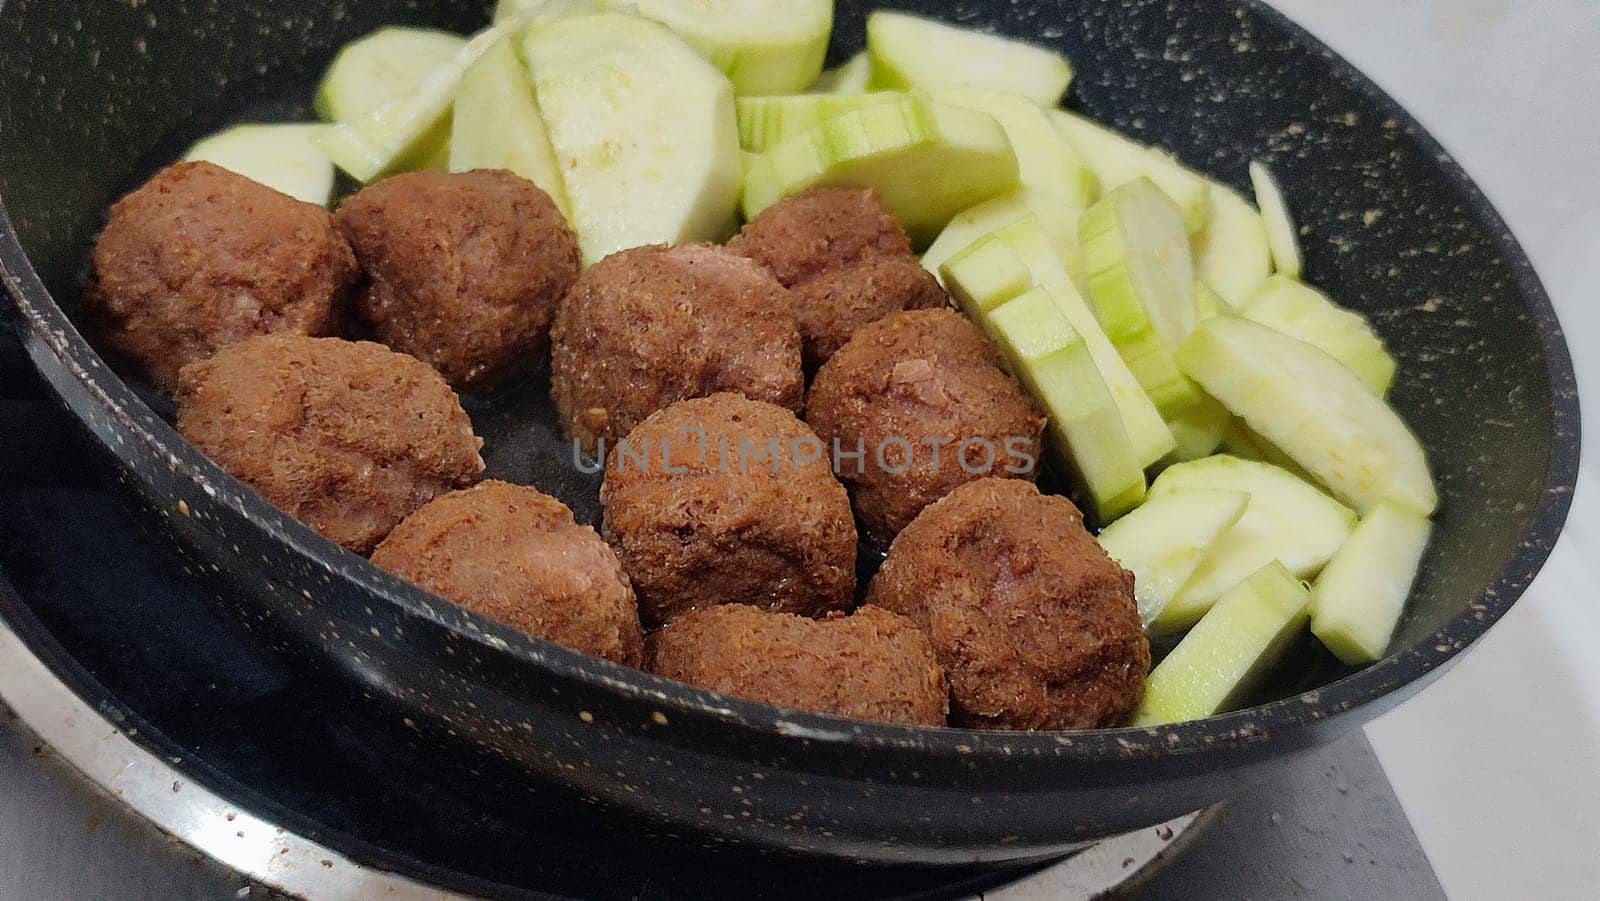 meatballs vegetable vegetarian dish, zucchini, dinner lunch food. High quality photo